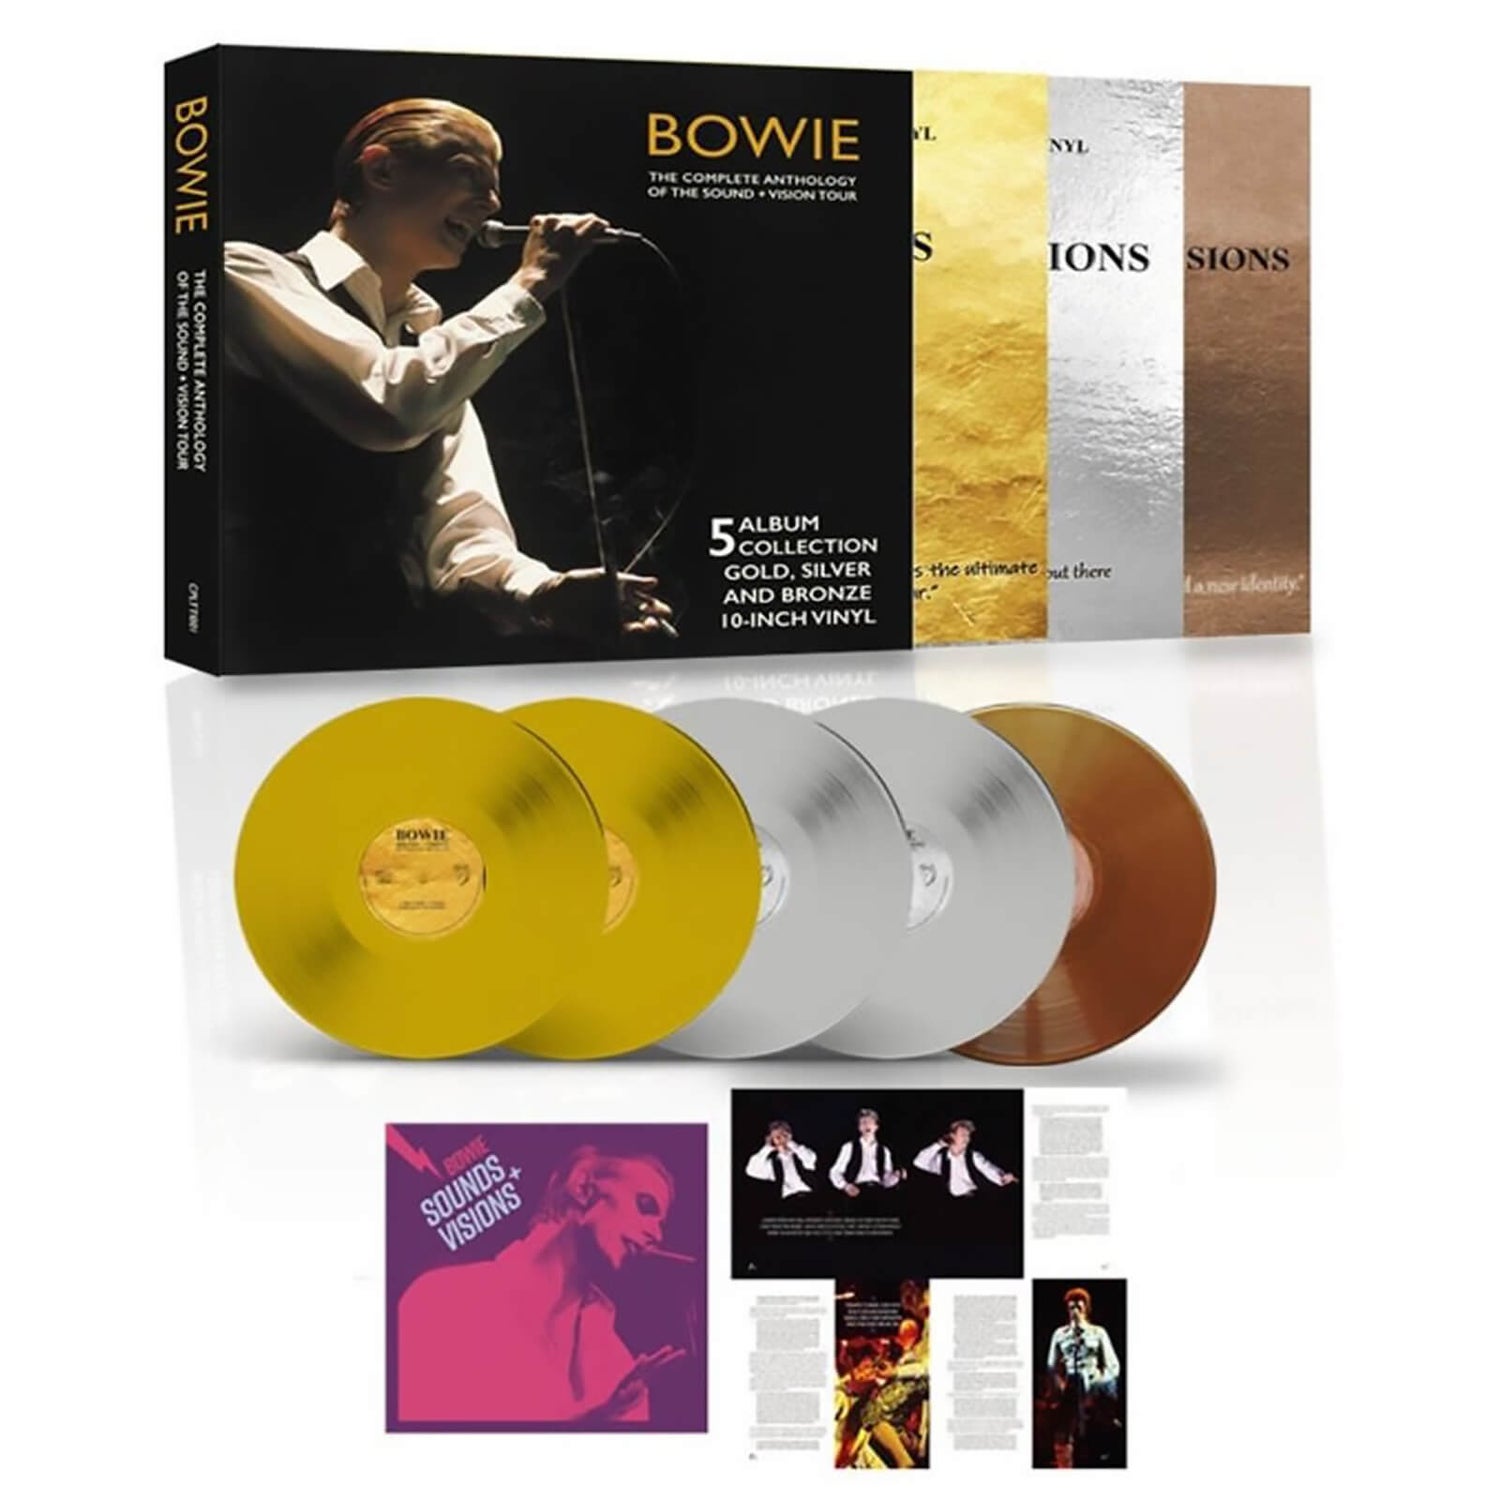 David Bowie - The Sound And Vision Tour Deluxe Edition (Coloured 10 Inch Vinyl) Vinyl Box Set